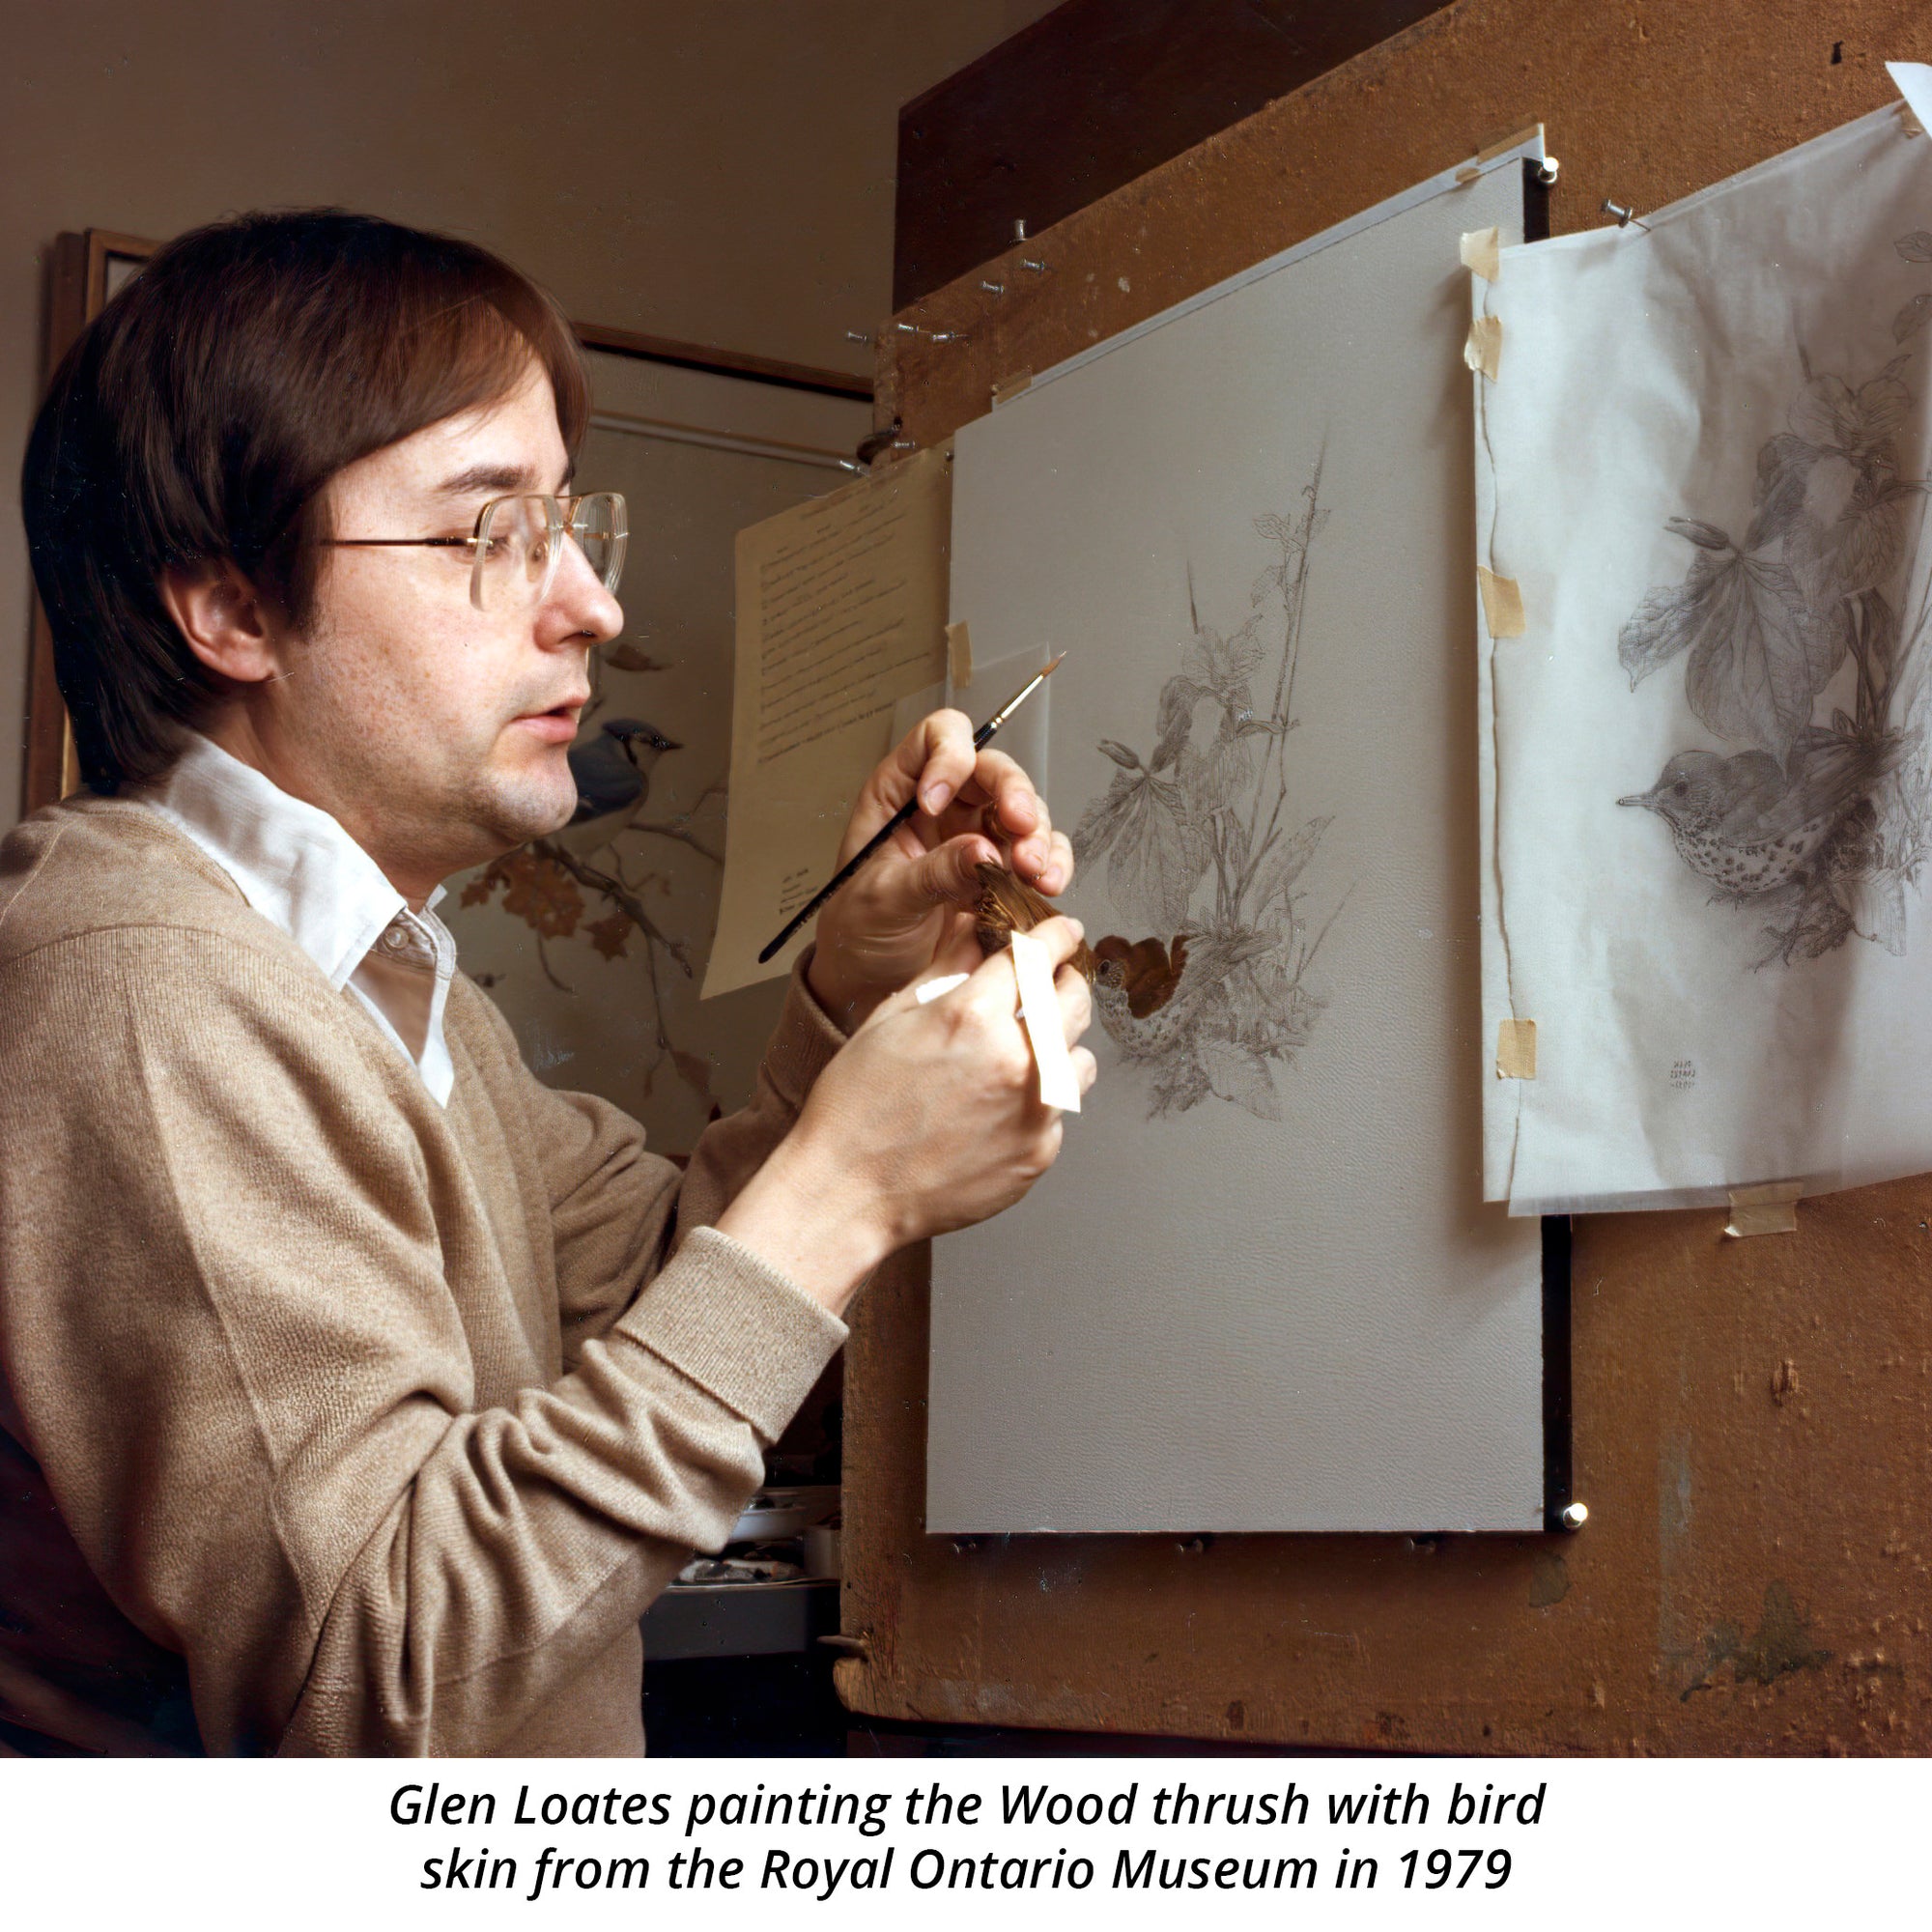 Glen Loates painting the Wood thrush with bird skins from the Royal Ontario Museum (ROM) in 1979